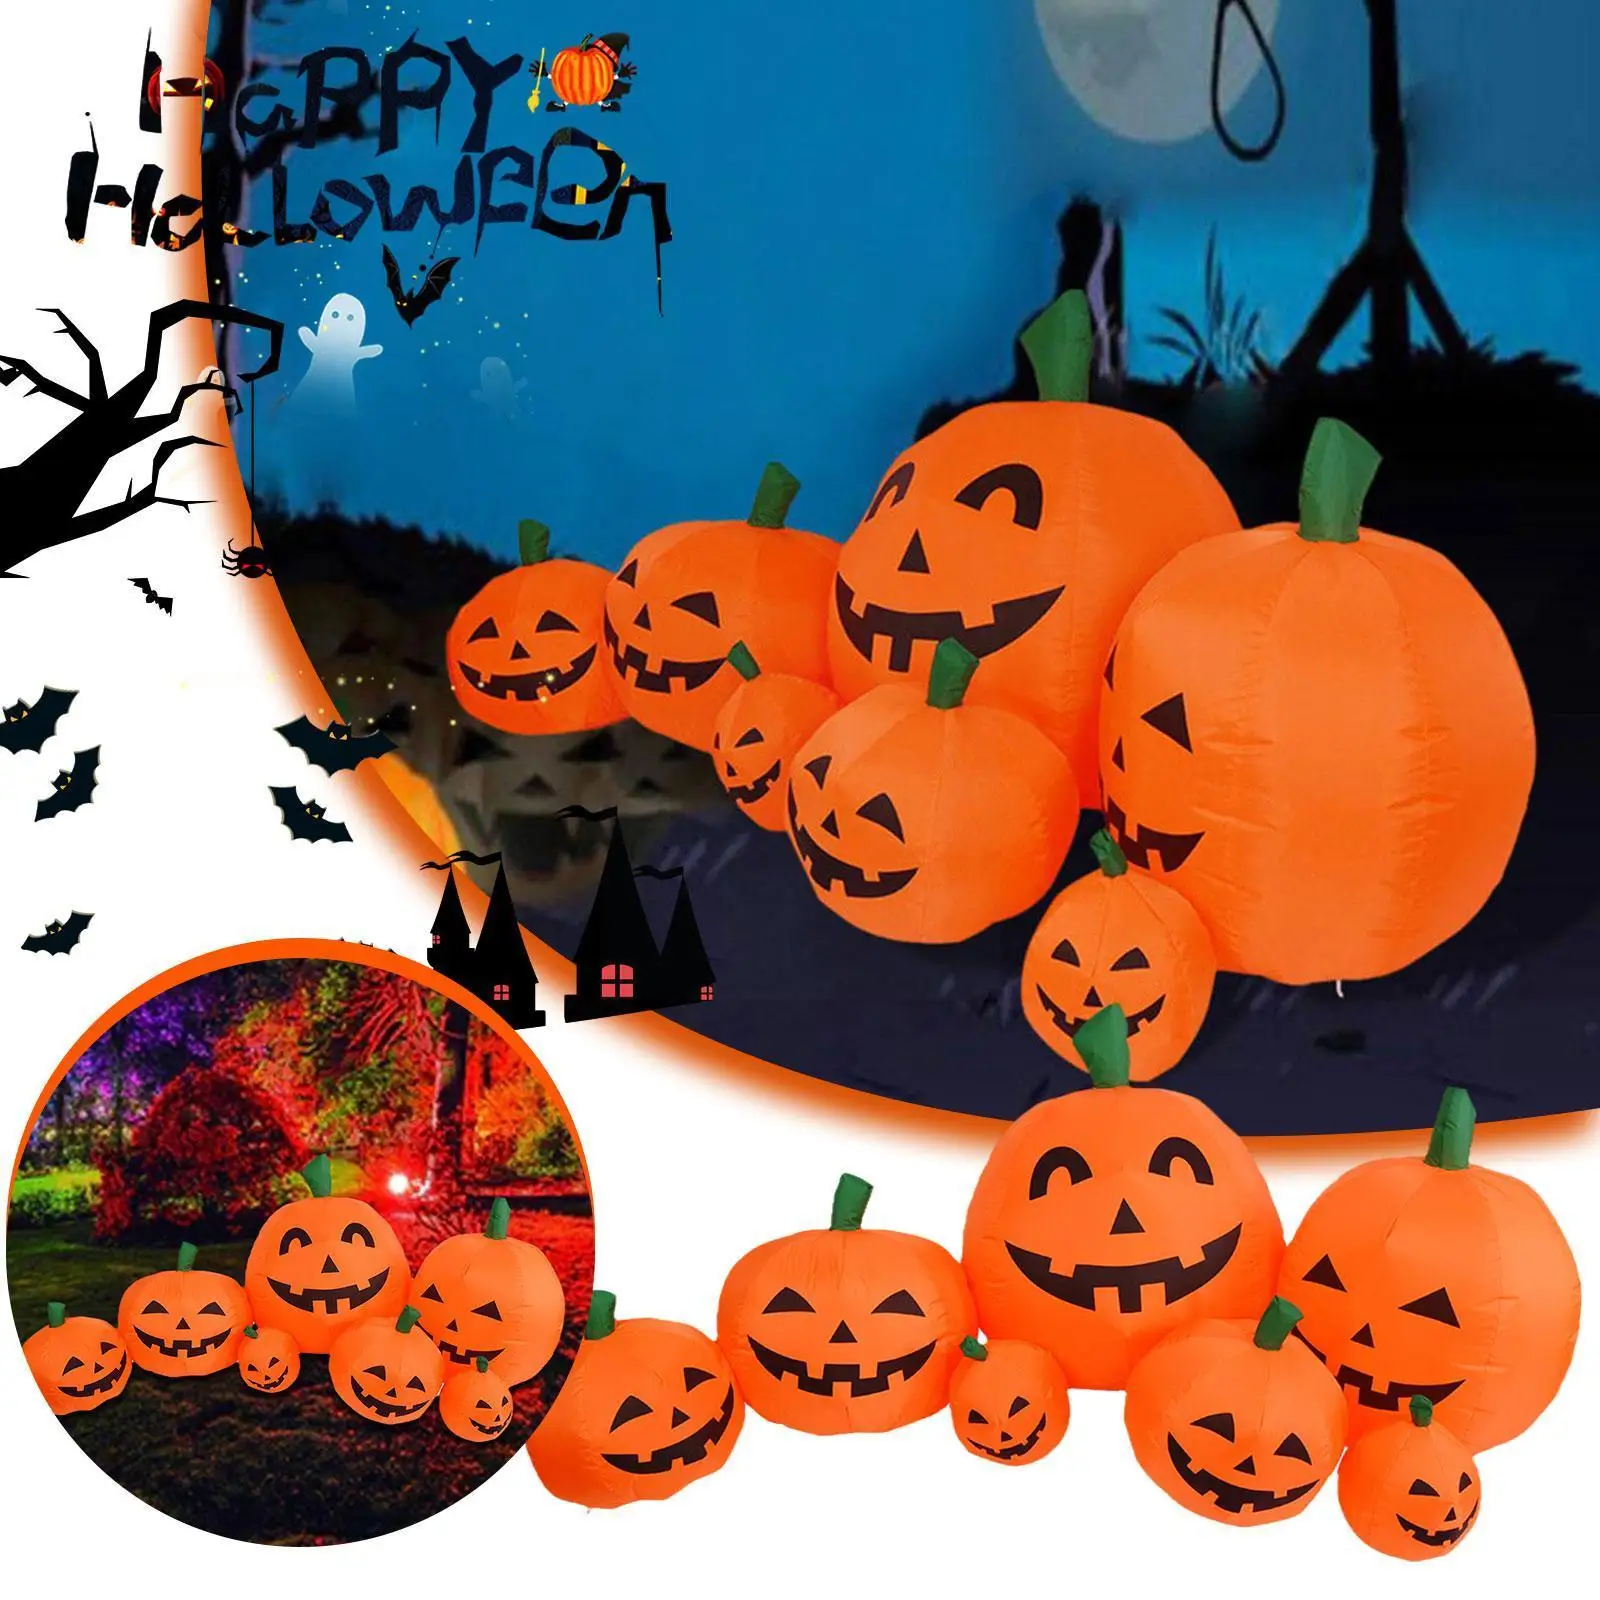 

Halloween Inflatable Outdoor Decoration Dead Tree With Pumpkin And Blow Up Yard Props For Holiday Party Garden W3t8